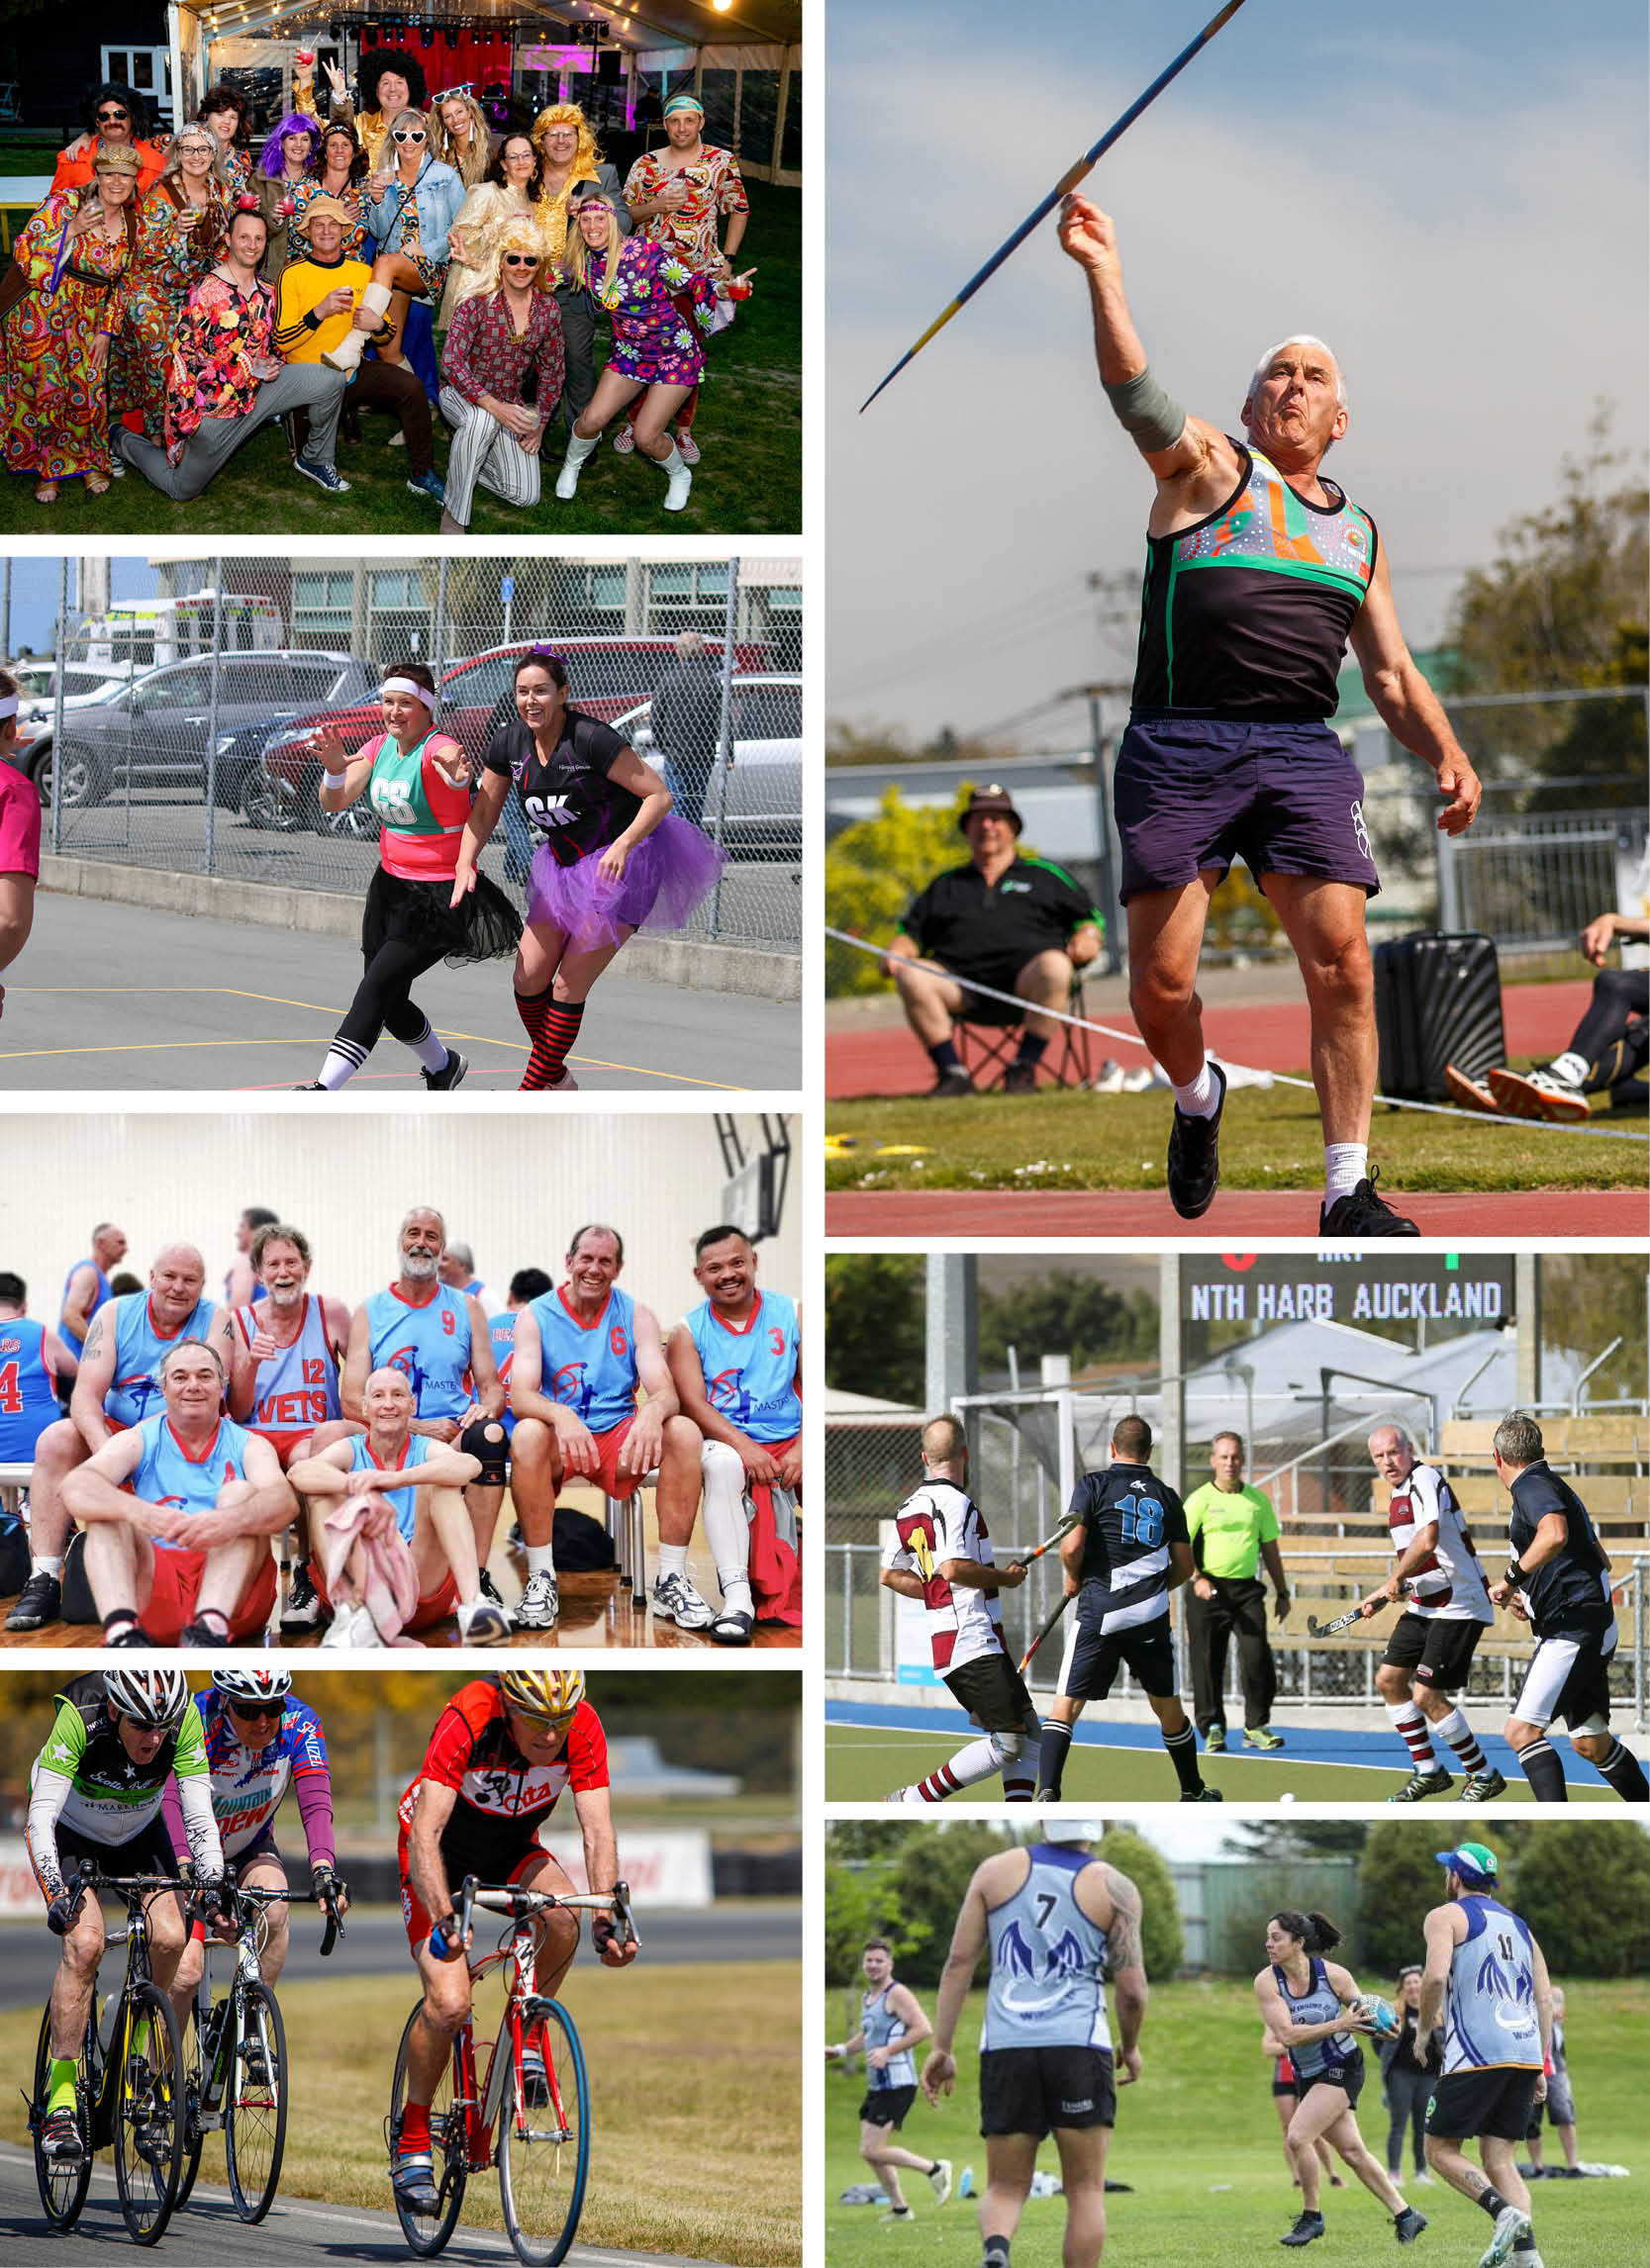 Collage of images from South Island Masters Game